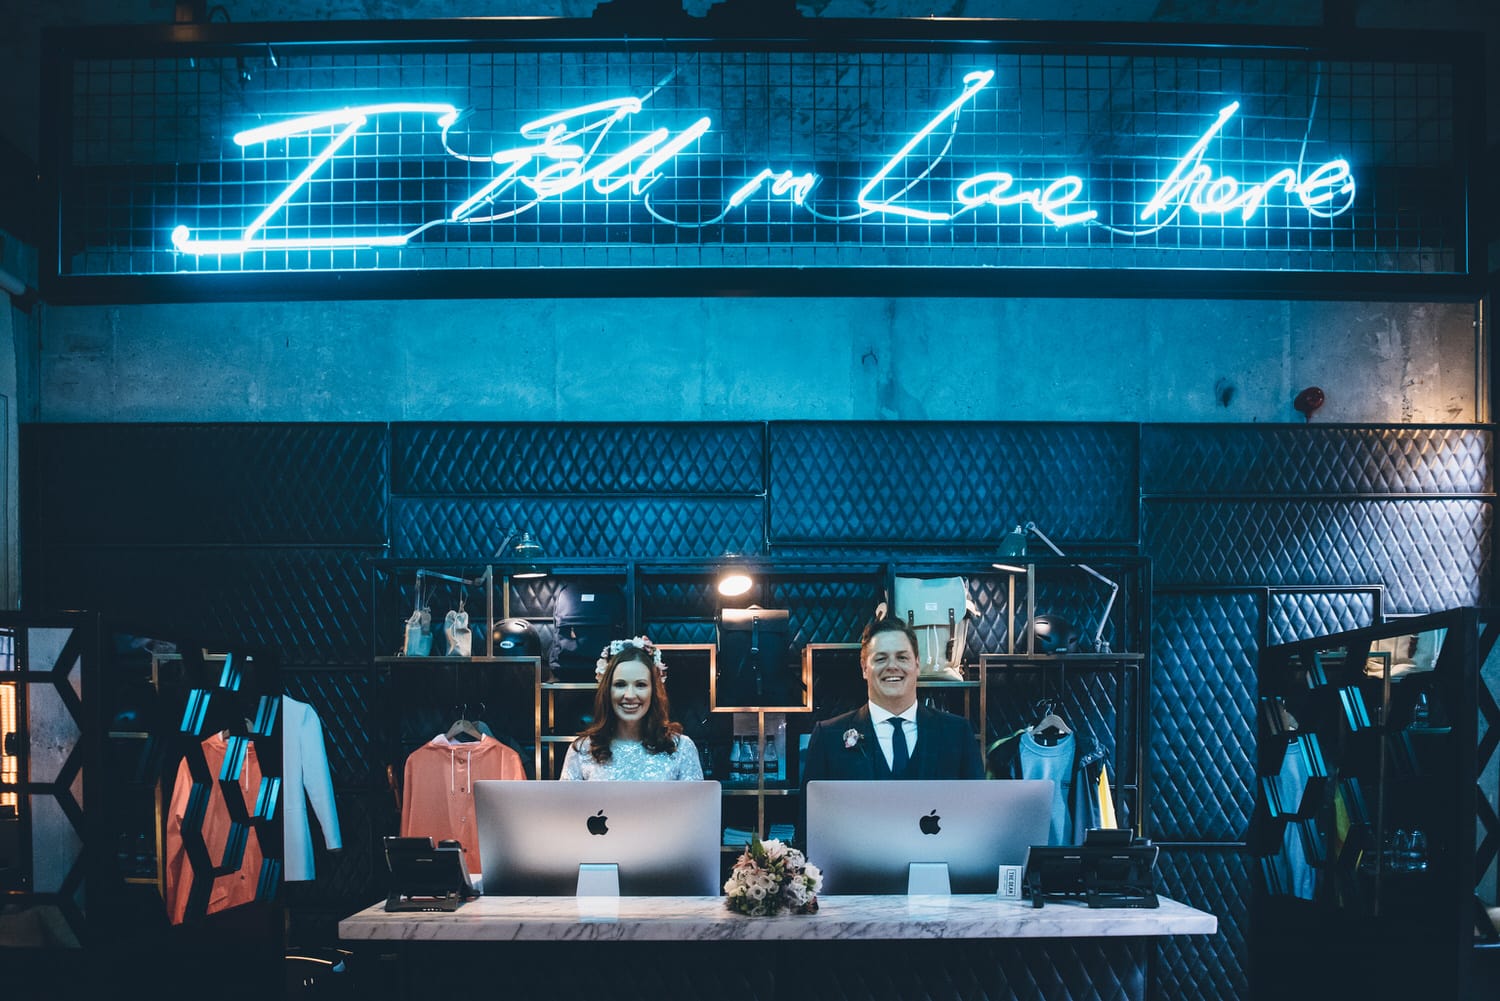 Wedding Couple standing together under a large blue neon sign that reads "I Fell In Love Here" at The Dean Hotel in Dublin, Ireland